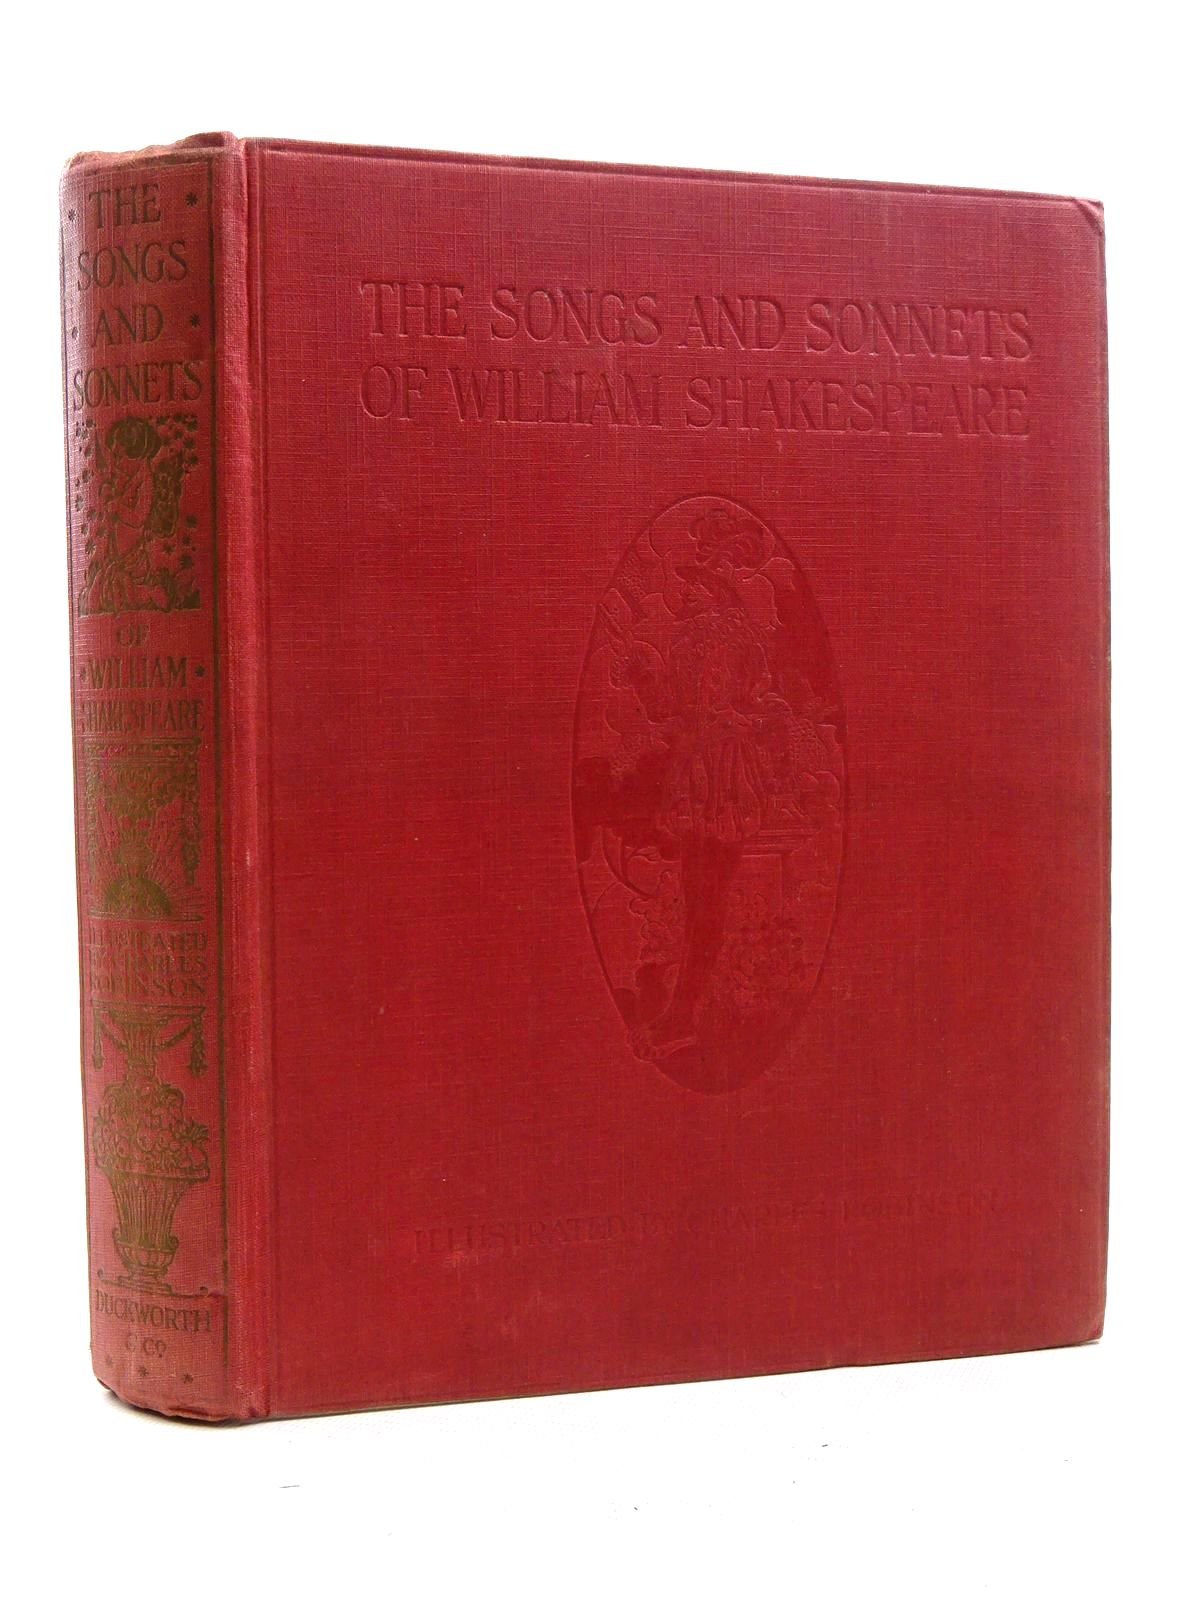 Photo of THE SONGS AND SONNETS OF WILLIAM SHAKESPEARE written by Shakespeare, William illustrated by Robinson, Charles published by Duckworth &amp; Co. (STOCK CODE: 2125309)  for sale by Stella & Rose's Books